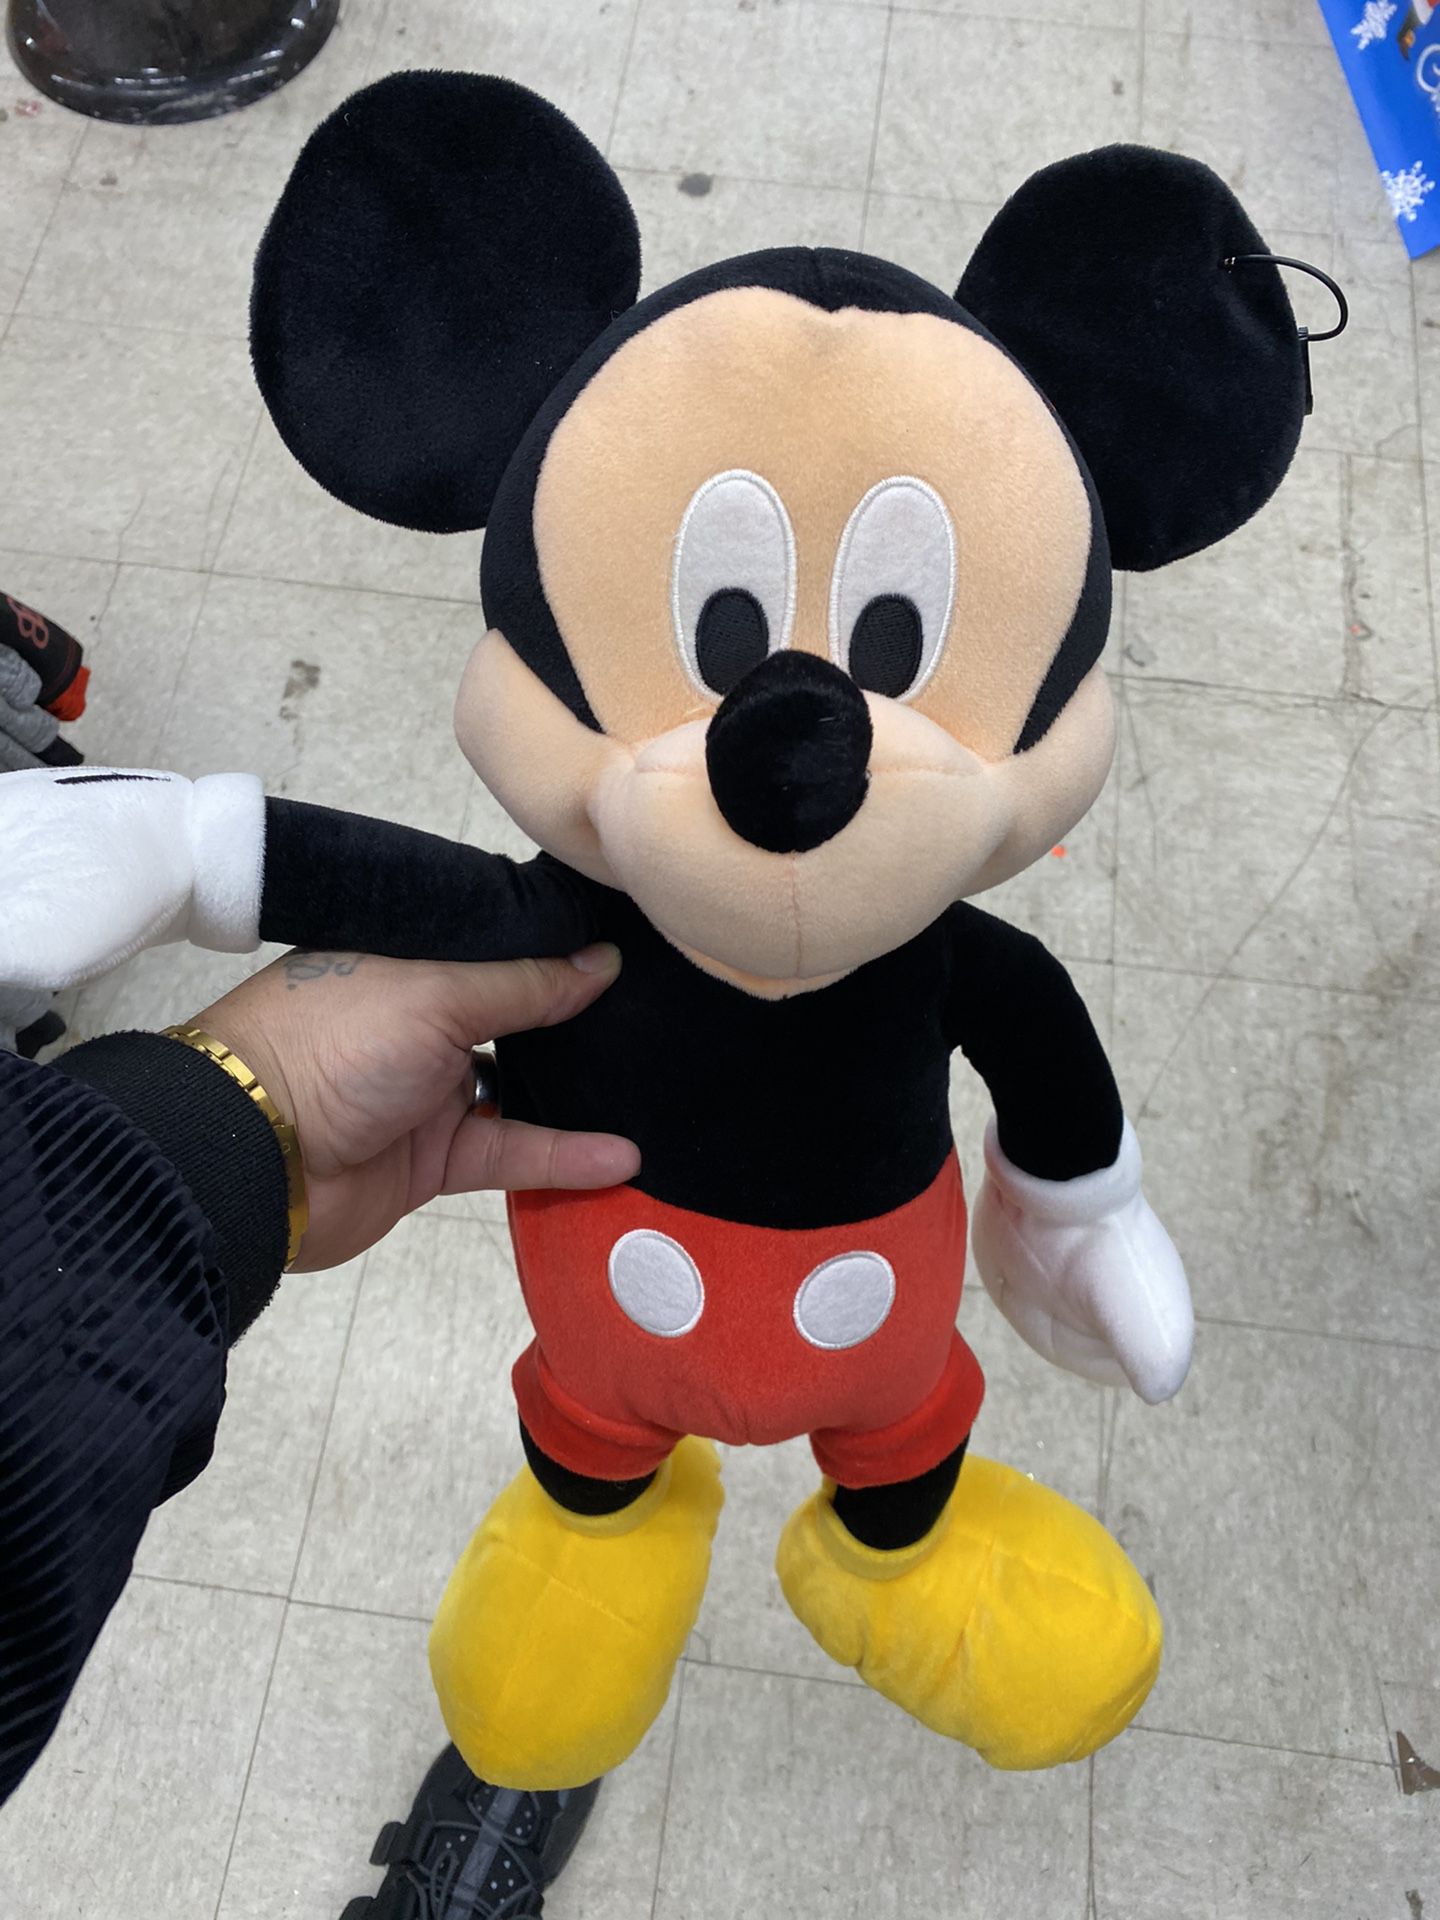 Disney Classic Micky Mouse Doll (26" long) Washable and All New Materials